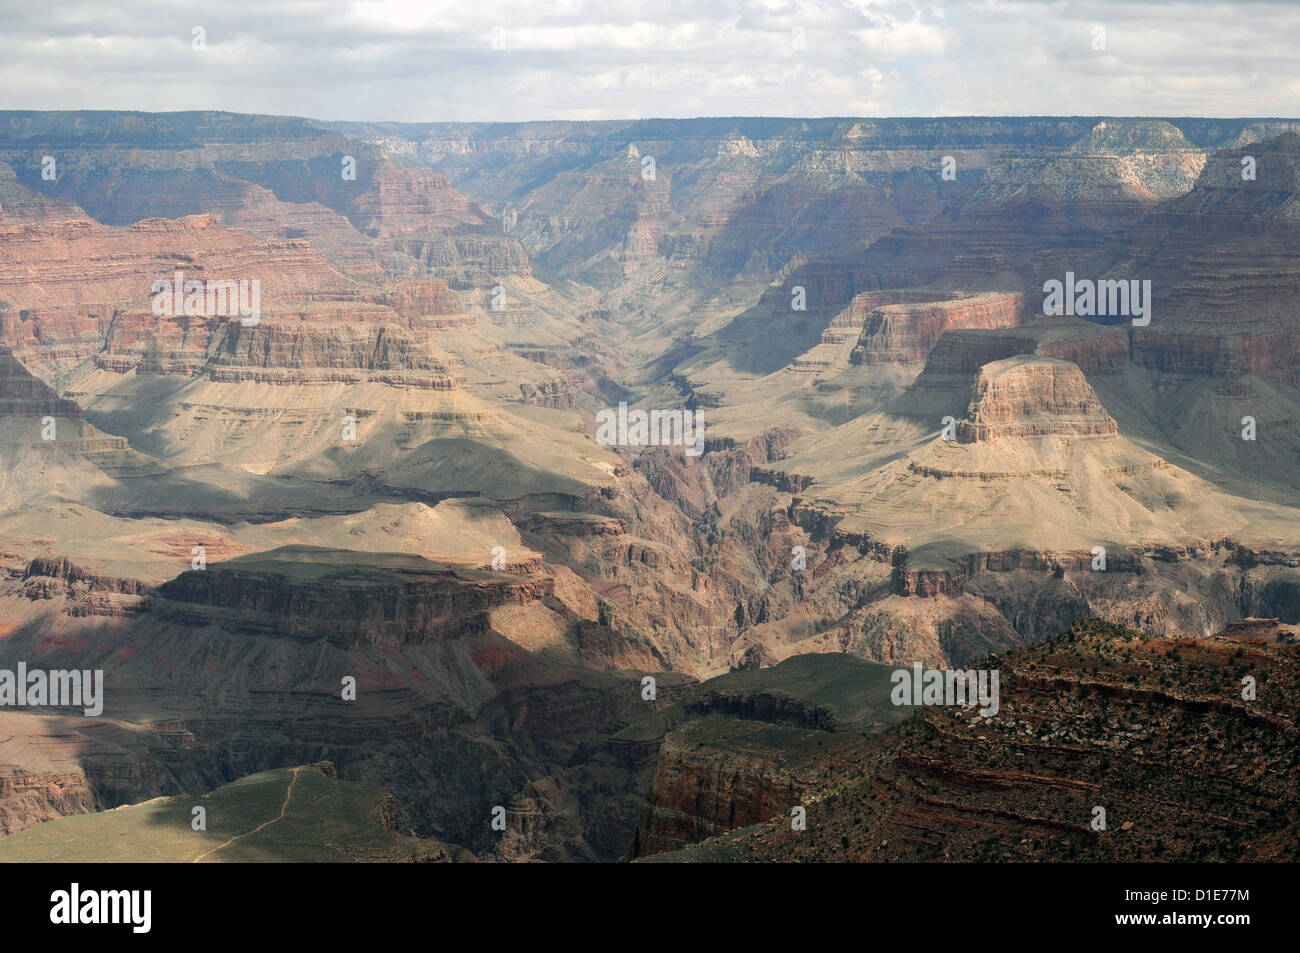 A view of the south side of The Grand Canyon, from the Rim, in Phoenix Arizona. Stock Photo